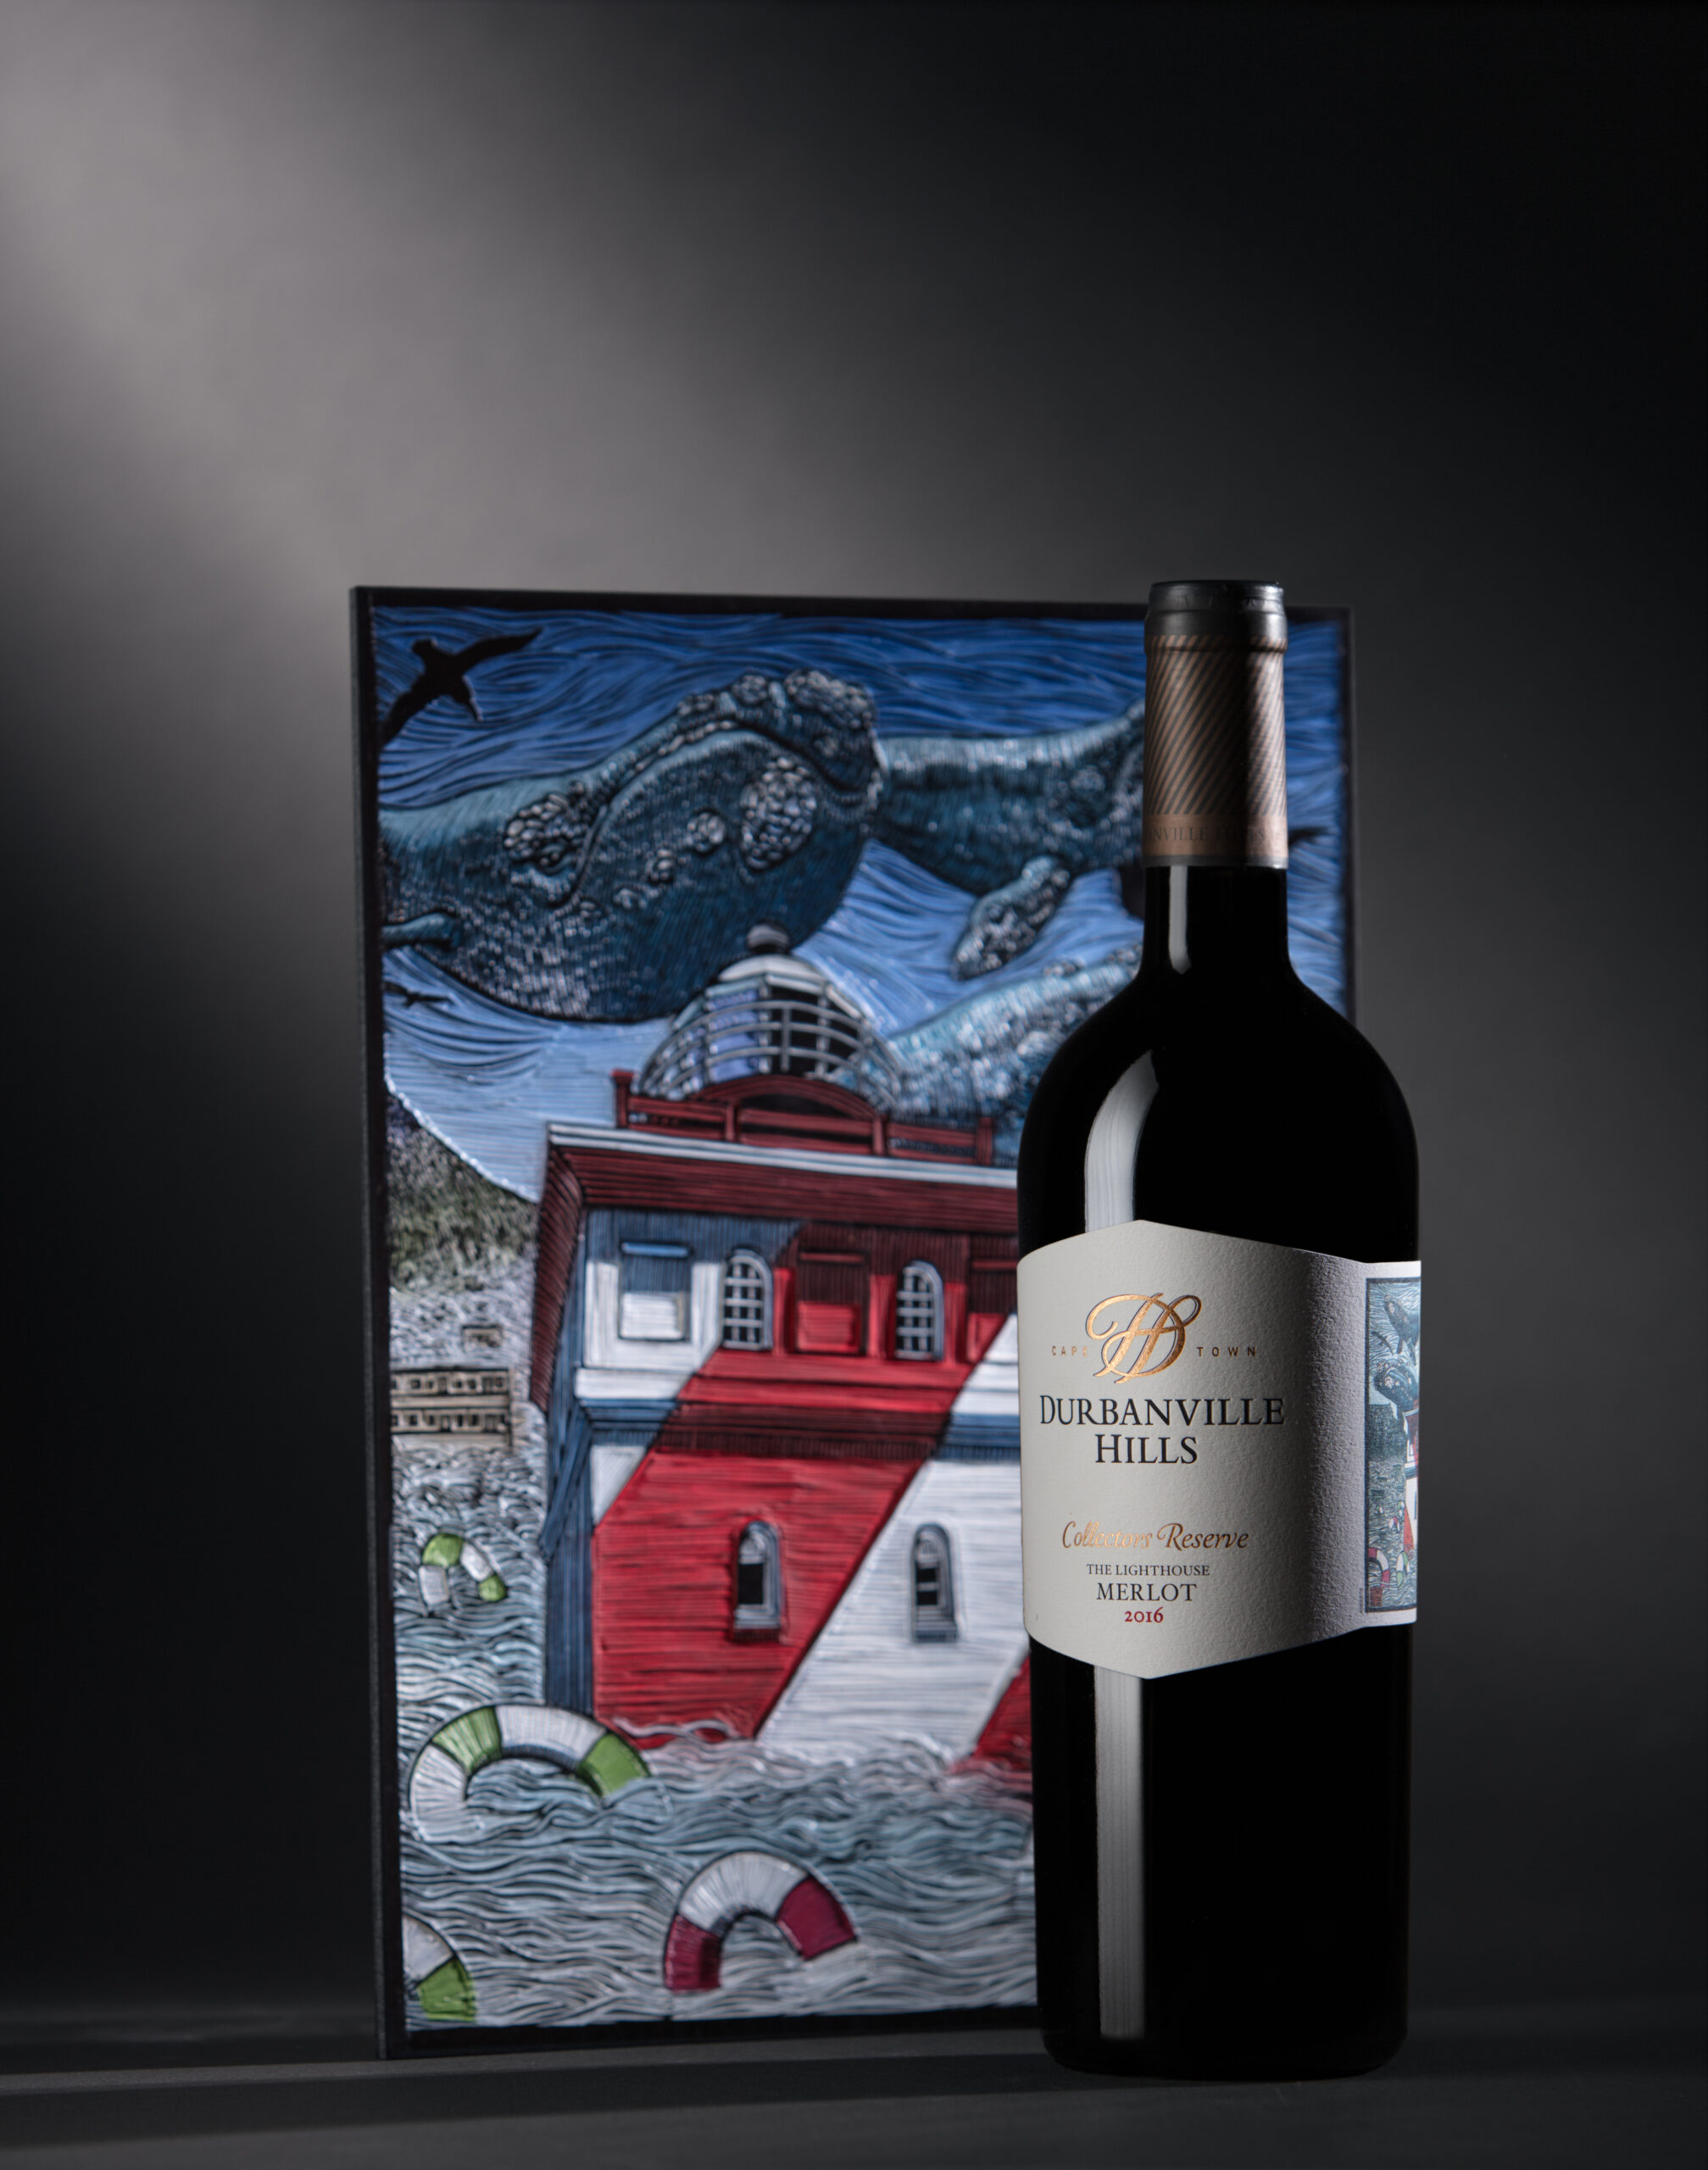 Durbanville Hills special edition sauvignon blanc featuring artwork by South African artist Theo Vorster